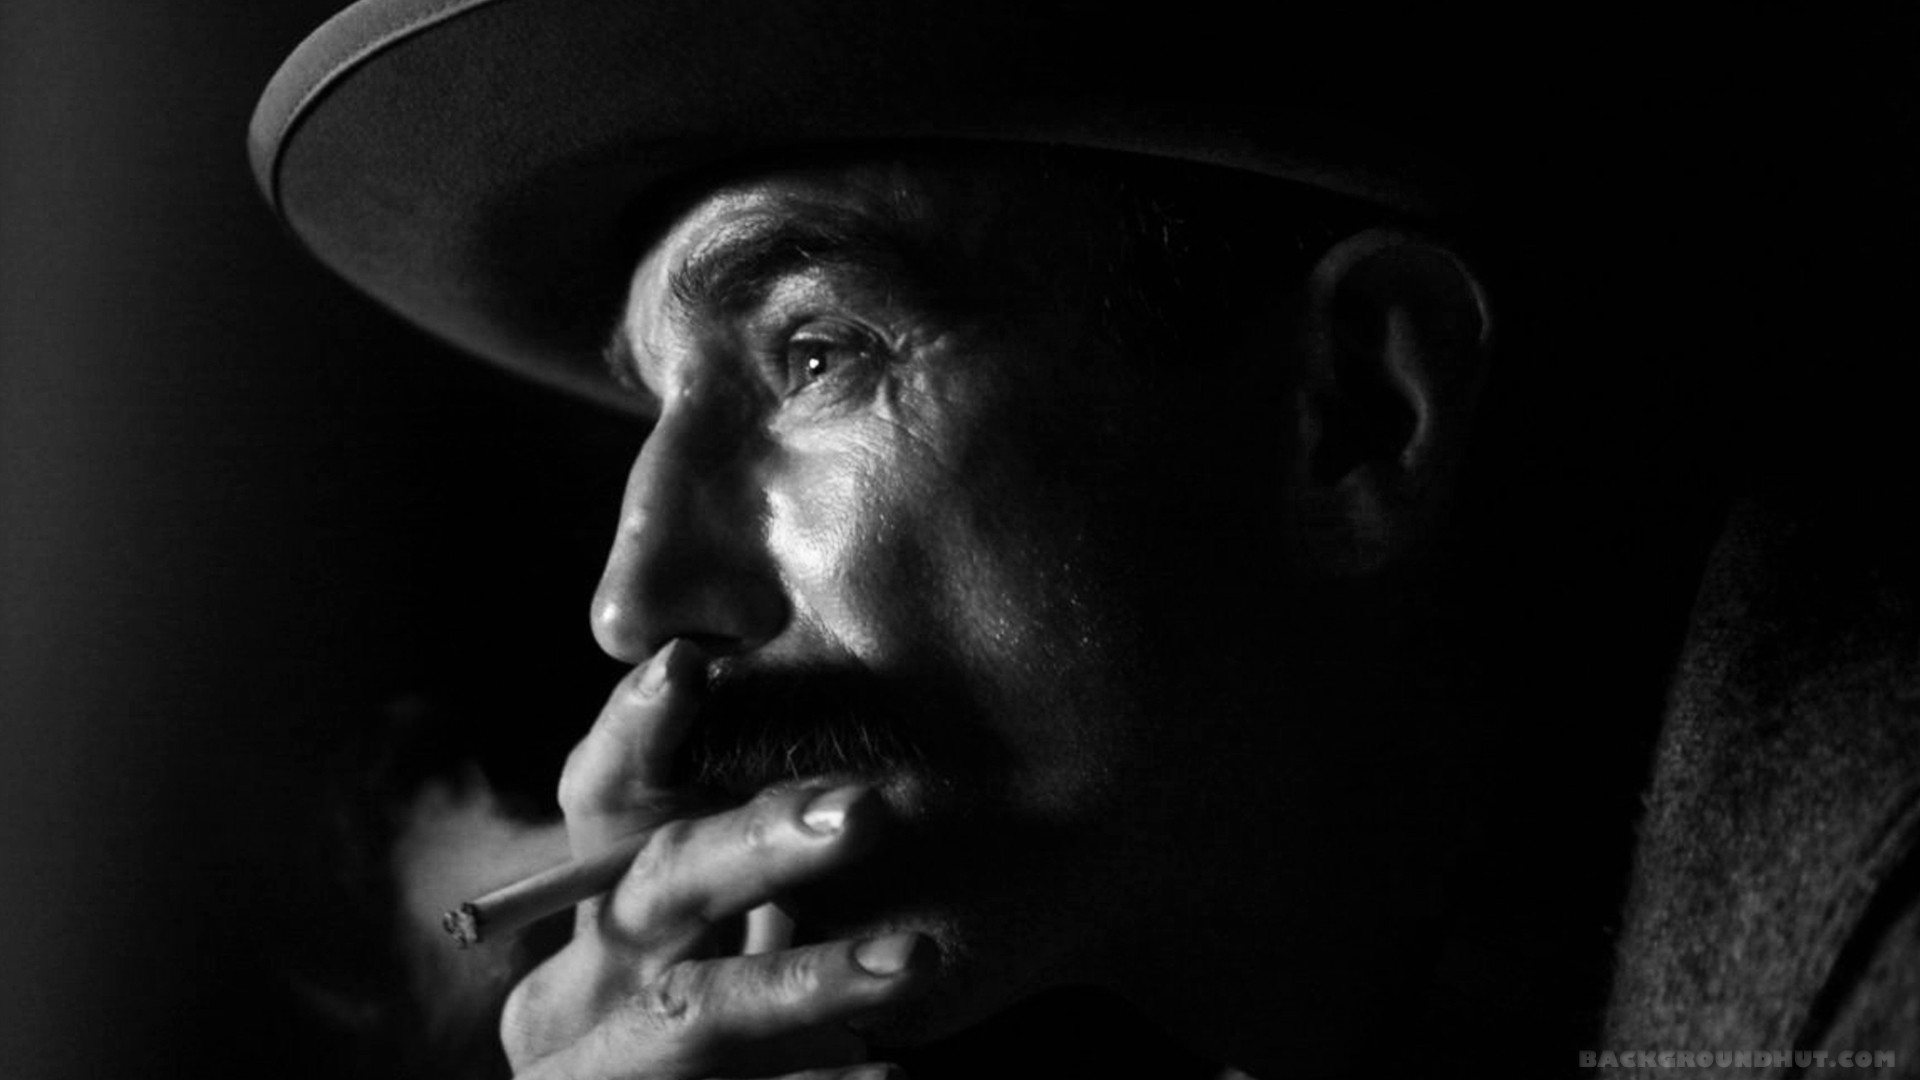 People 1920x1080 There Will be Blood monochrome hat profile Daniel Day-Lewis movies smoking cigarettes men